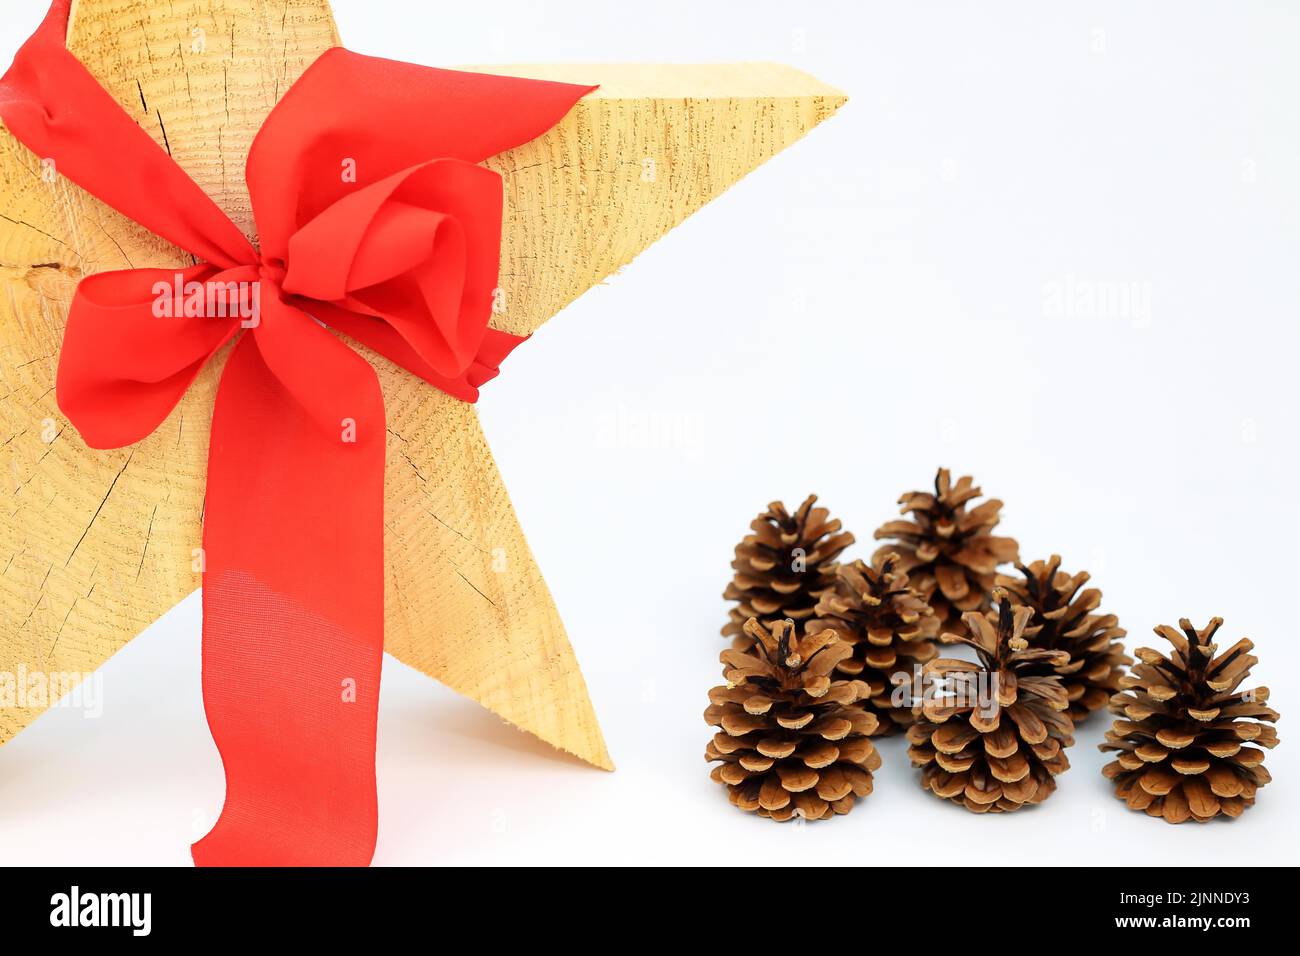 Christmas wooden star with a red bow on a white background, pine cone or pine cone on the side Stock Photo